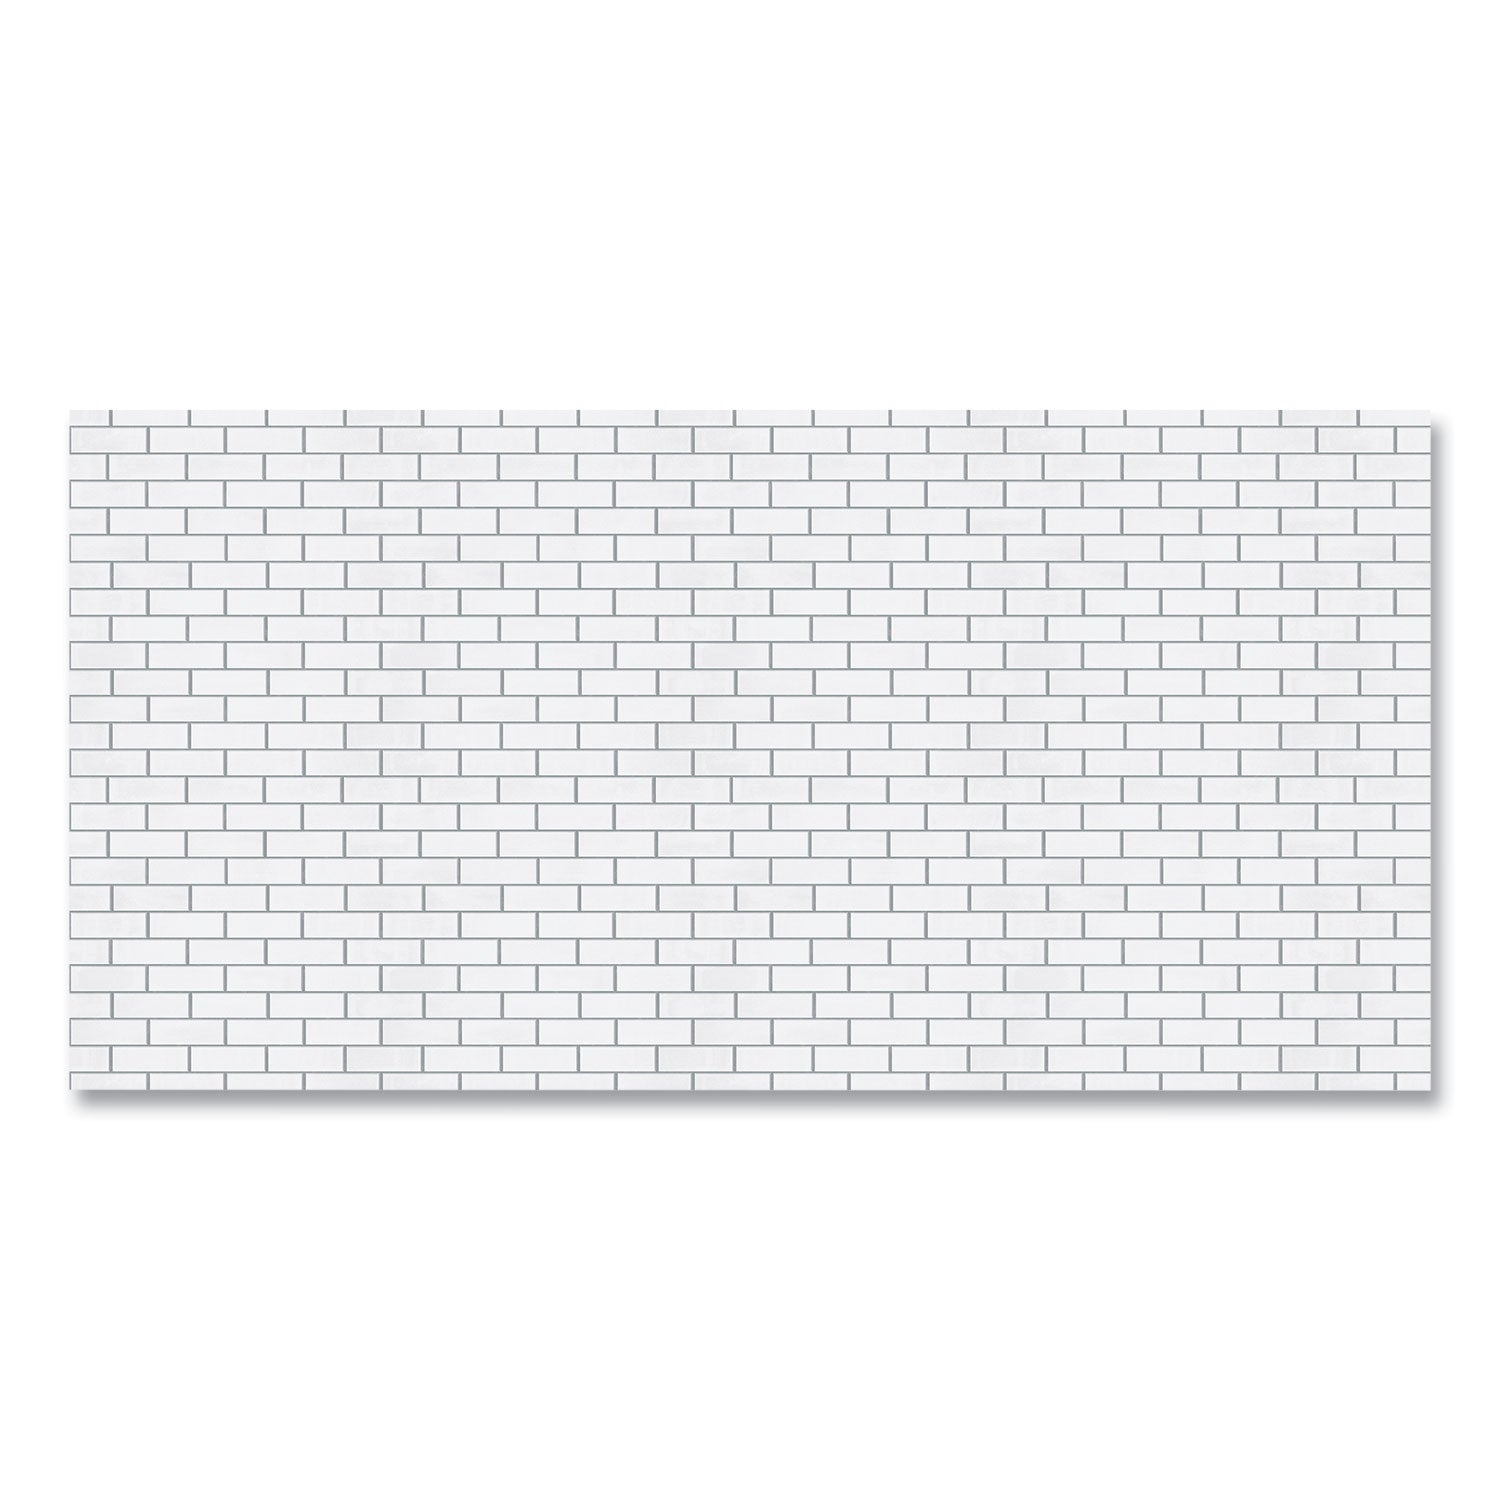 fadeless-paper-roll-50-lb-bond-weight-48-x-50-ft-white-subway-tile_pac57505 - 1